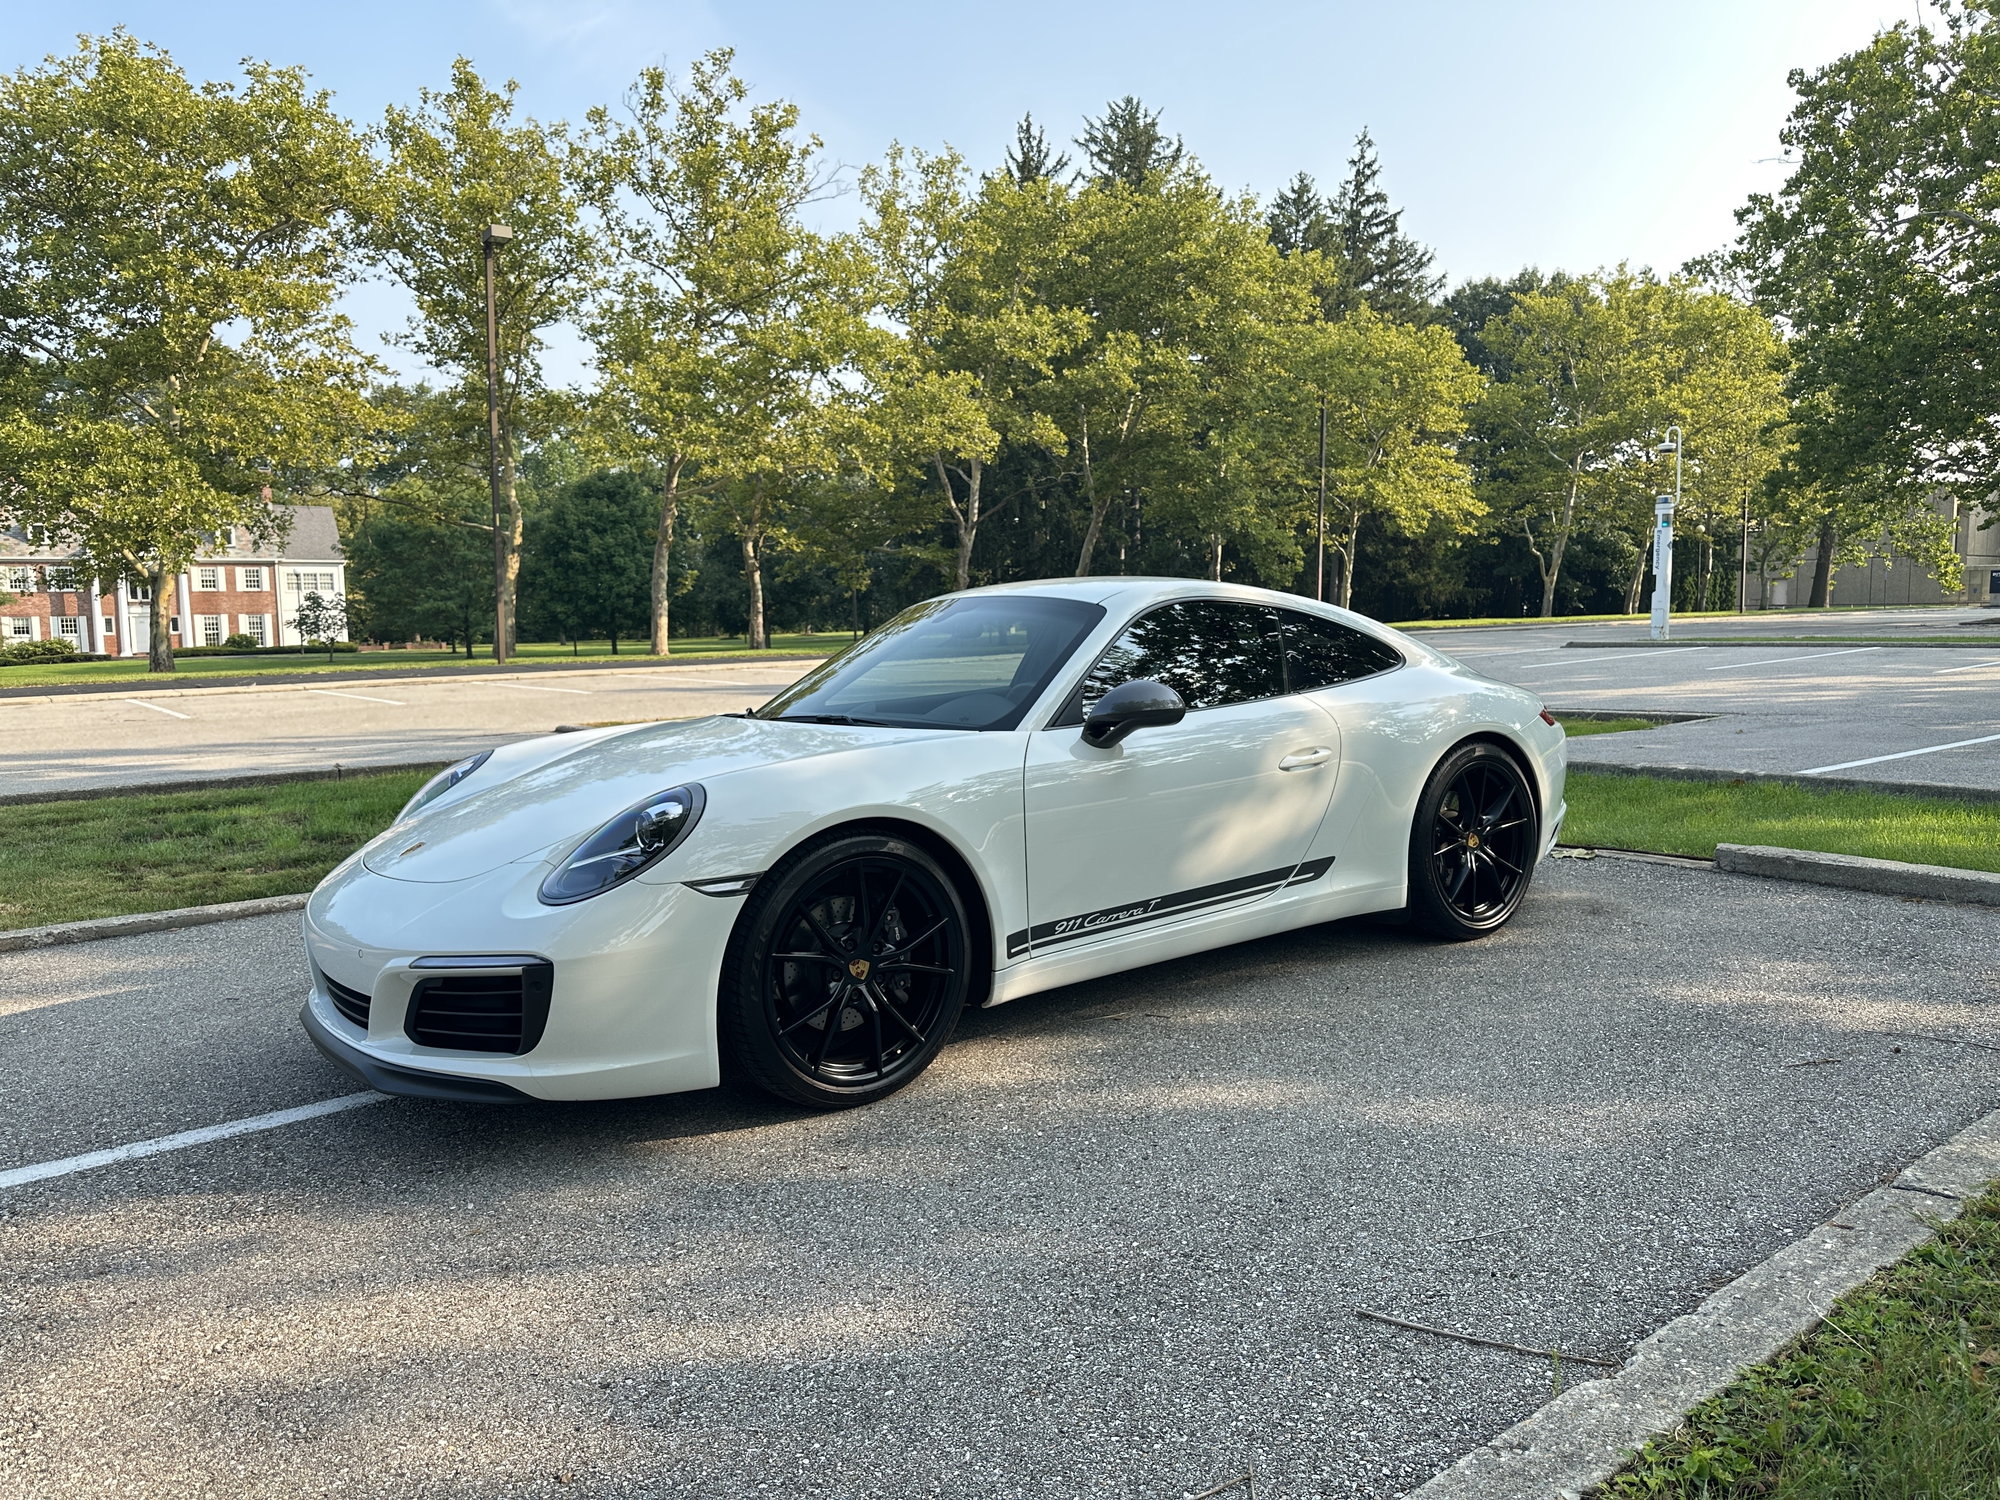 2019 Porsche 911 - 2019 Carrera T with 19 way seat, interior package, low mileage - Used - VIN WP0AA2A94KS103195 - 13,200 Miles - 6 cyl - 2WD - Manual - Coupe - White - Indianapolis, IN 46220, United States